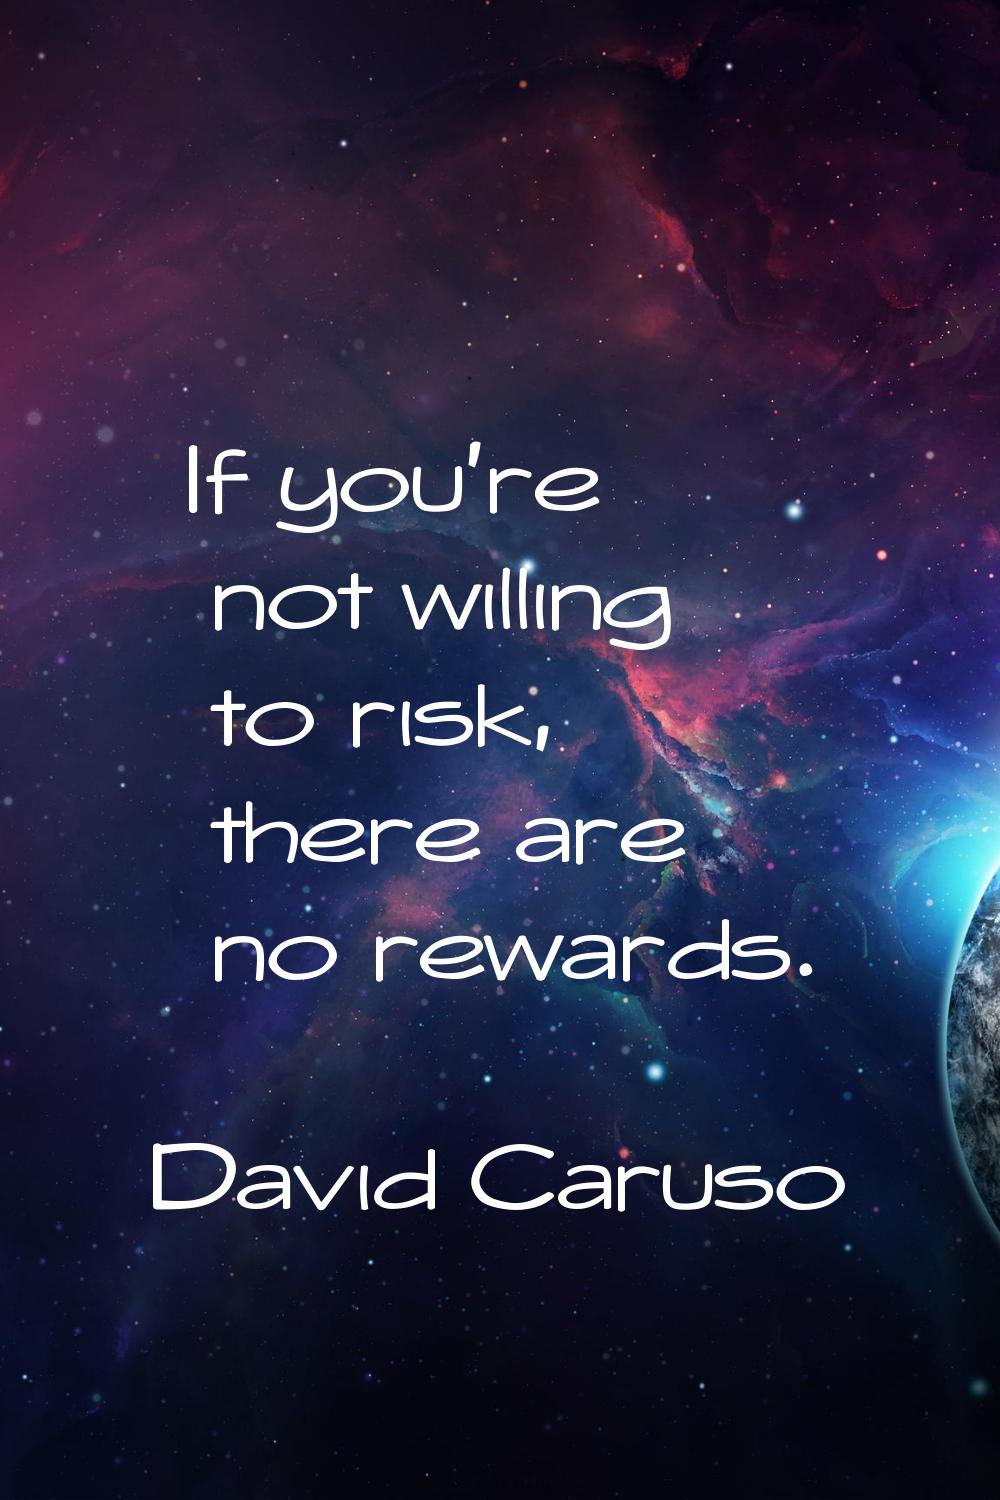 If you're not willing to risk, there are no rewards.